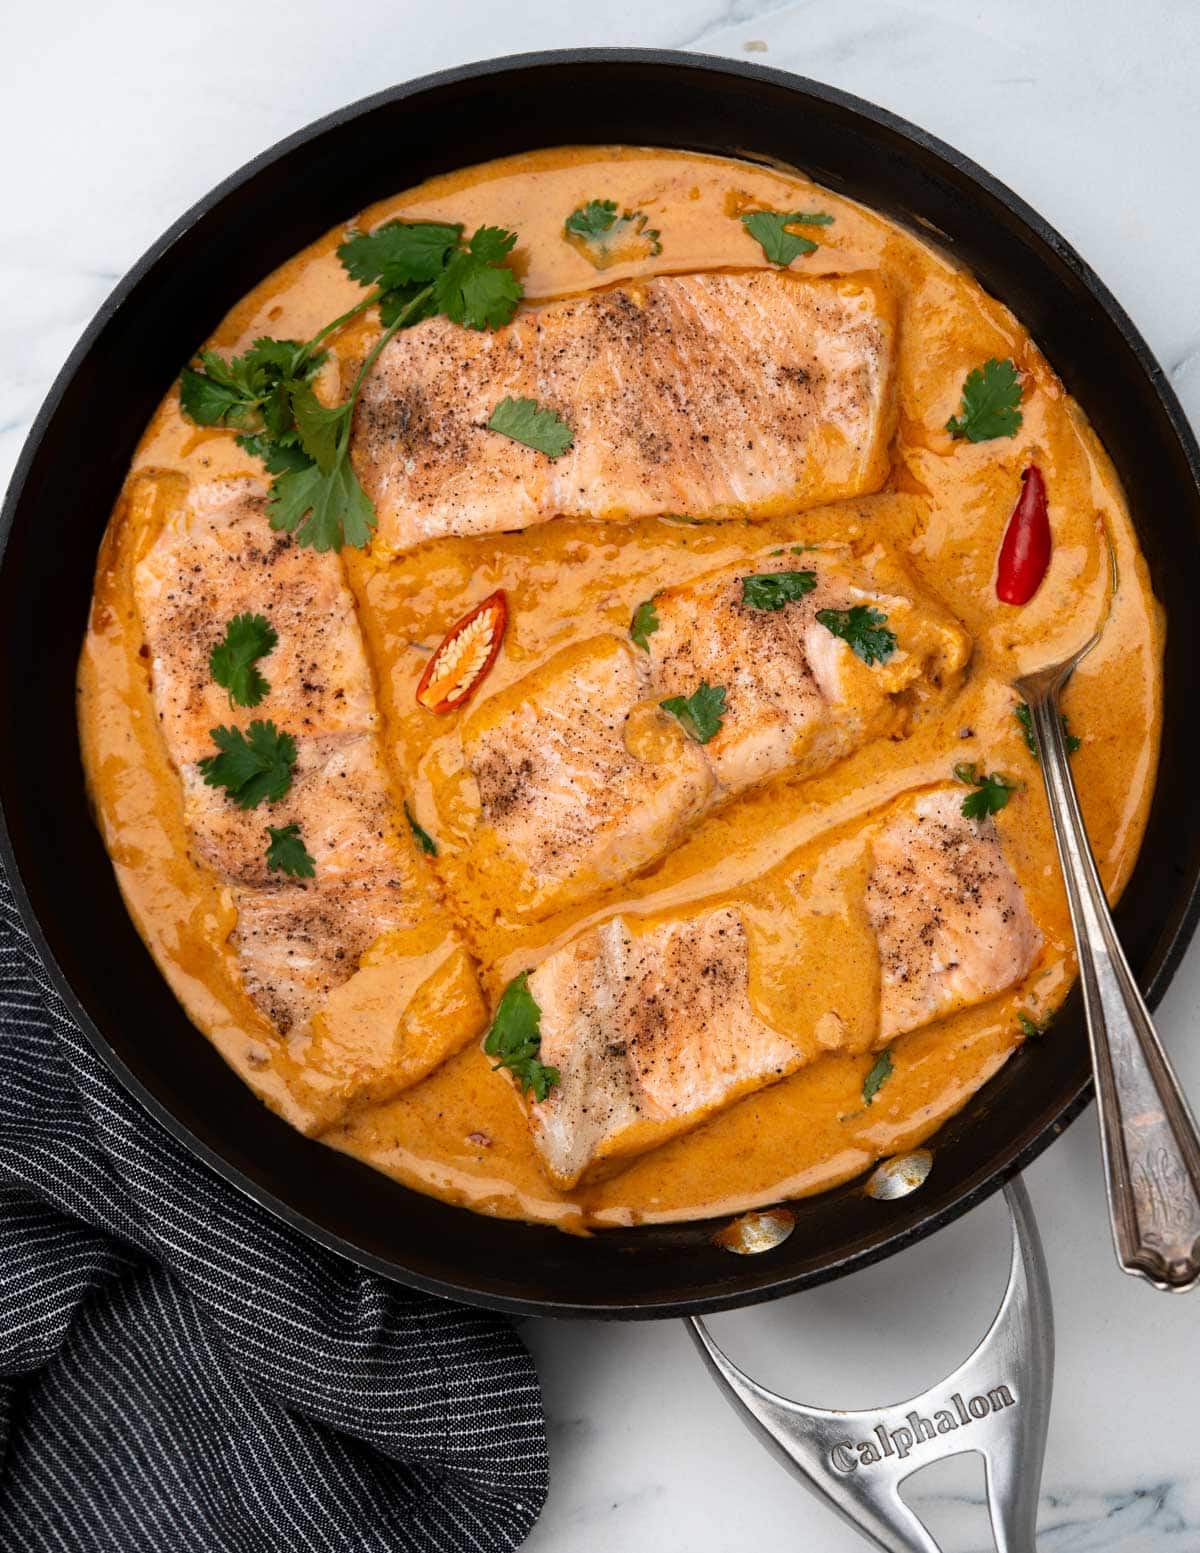 Coconut salmon curry made in a black skillet, shows four salmon fillets engulfed in a creamy rich coconut cury sauce and garnished with cilantro and chili peppers.